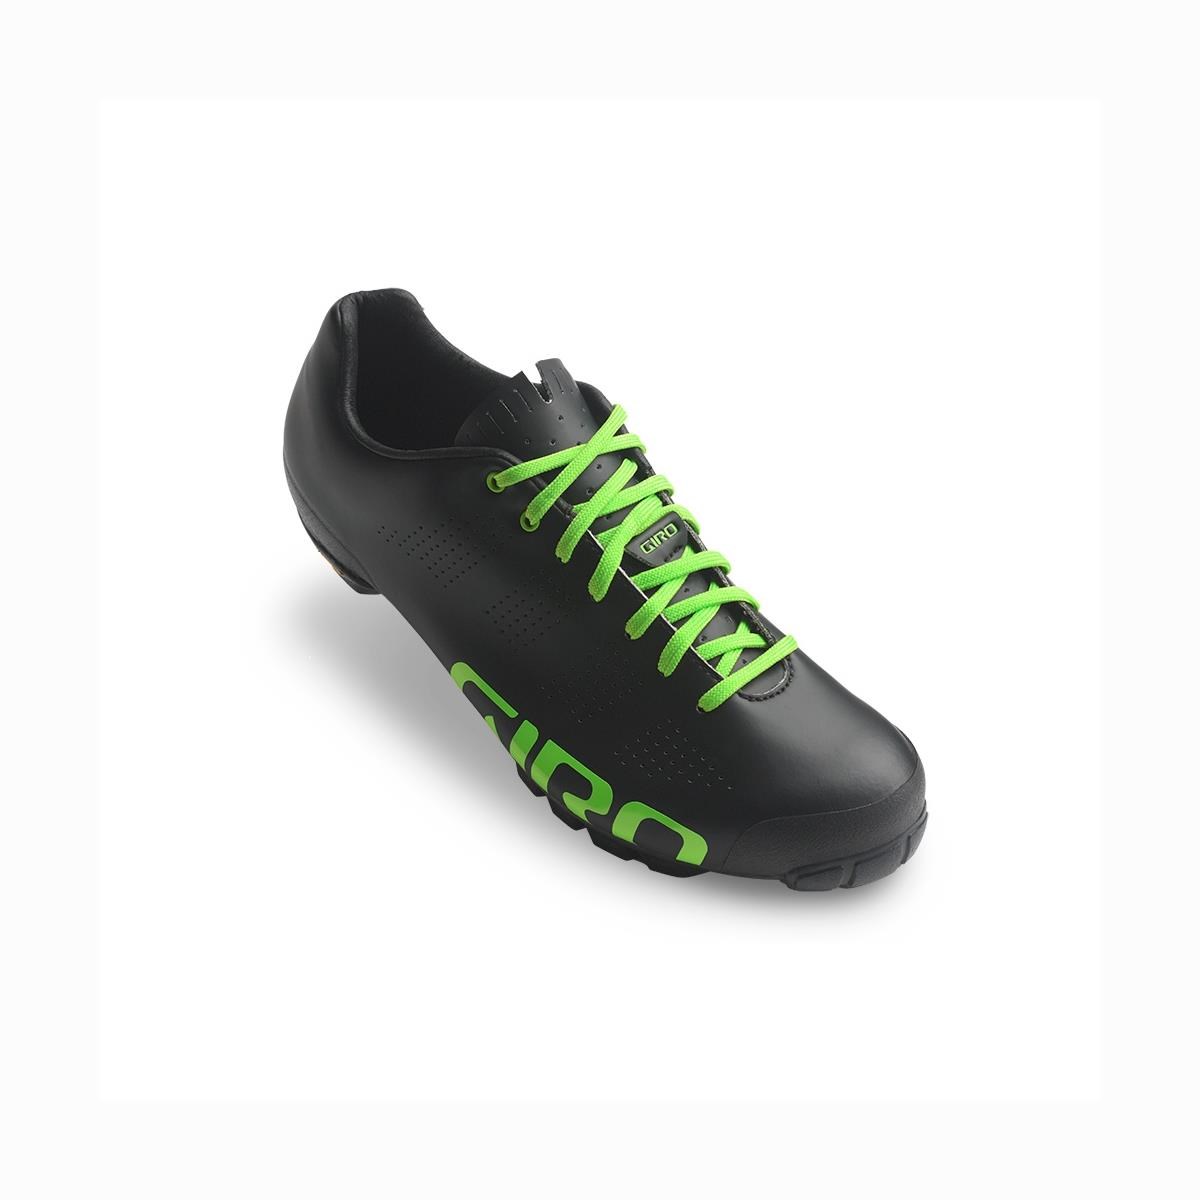 Giro Empire VR90 SPD MTB Shoes product image